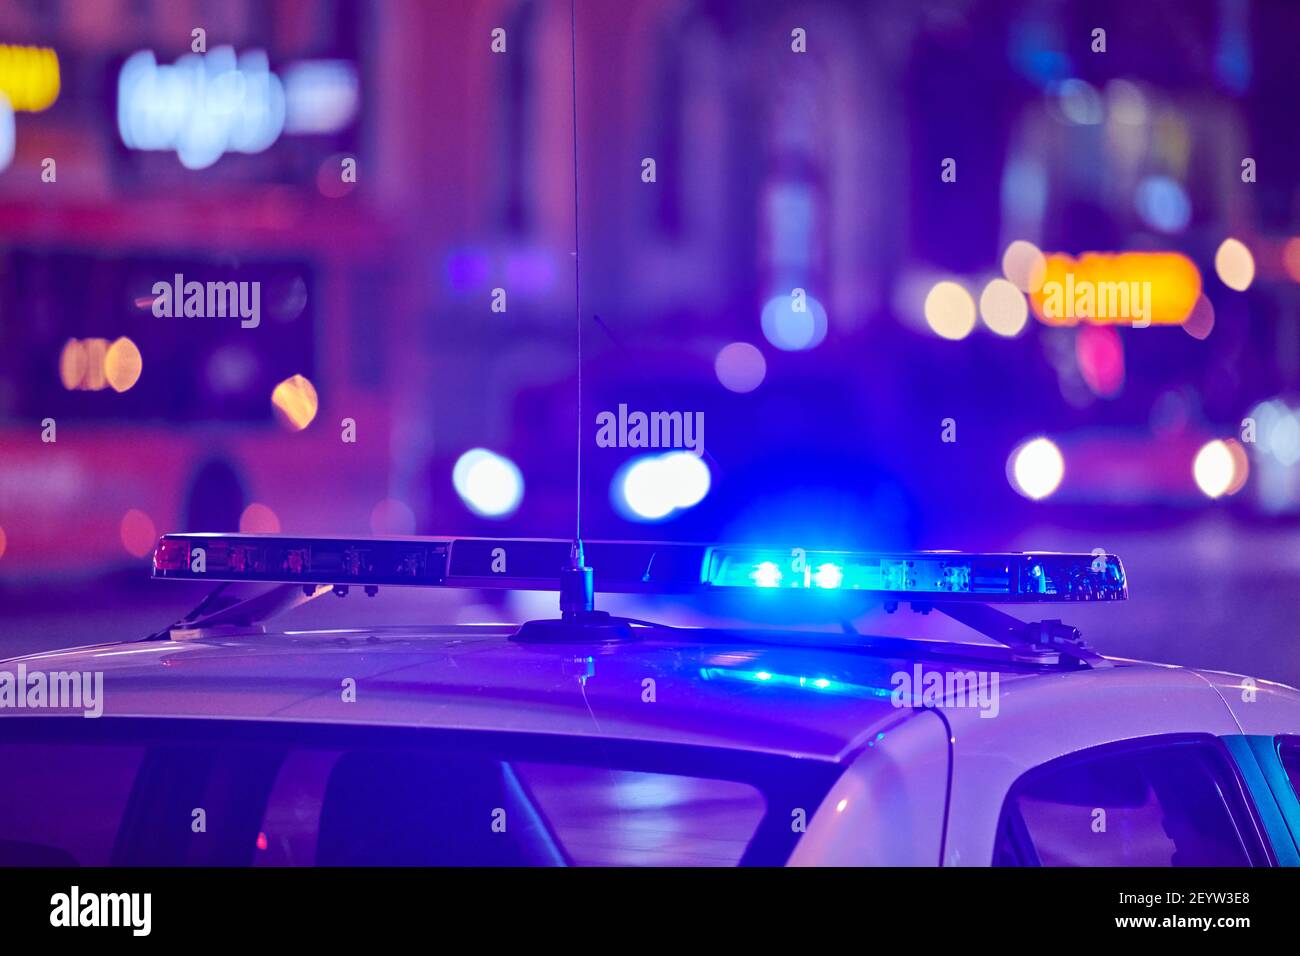 Police car lights at night city street. Red and blue lights. Road traffic accident. Evening patrolling Stock Photo